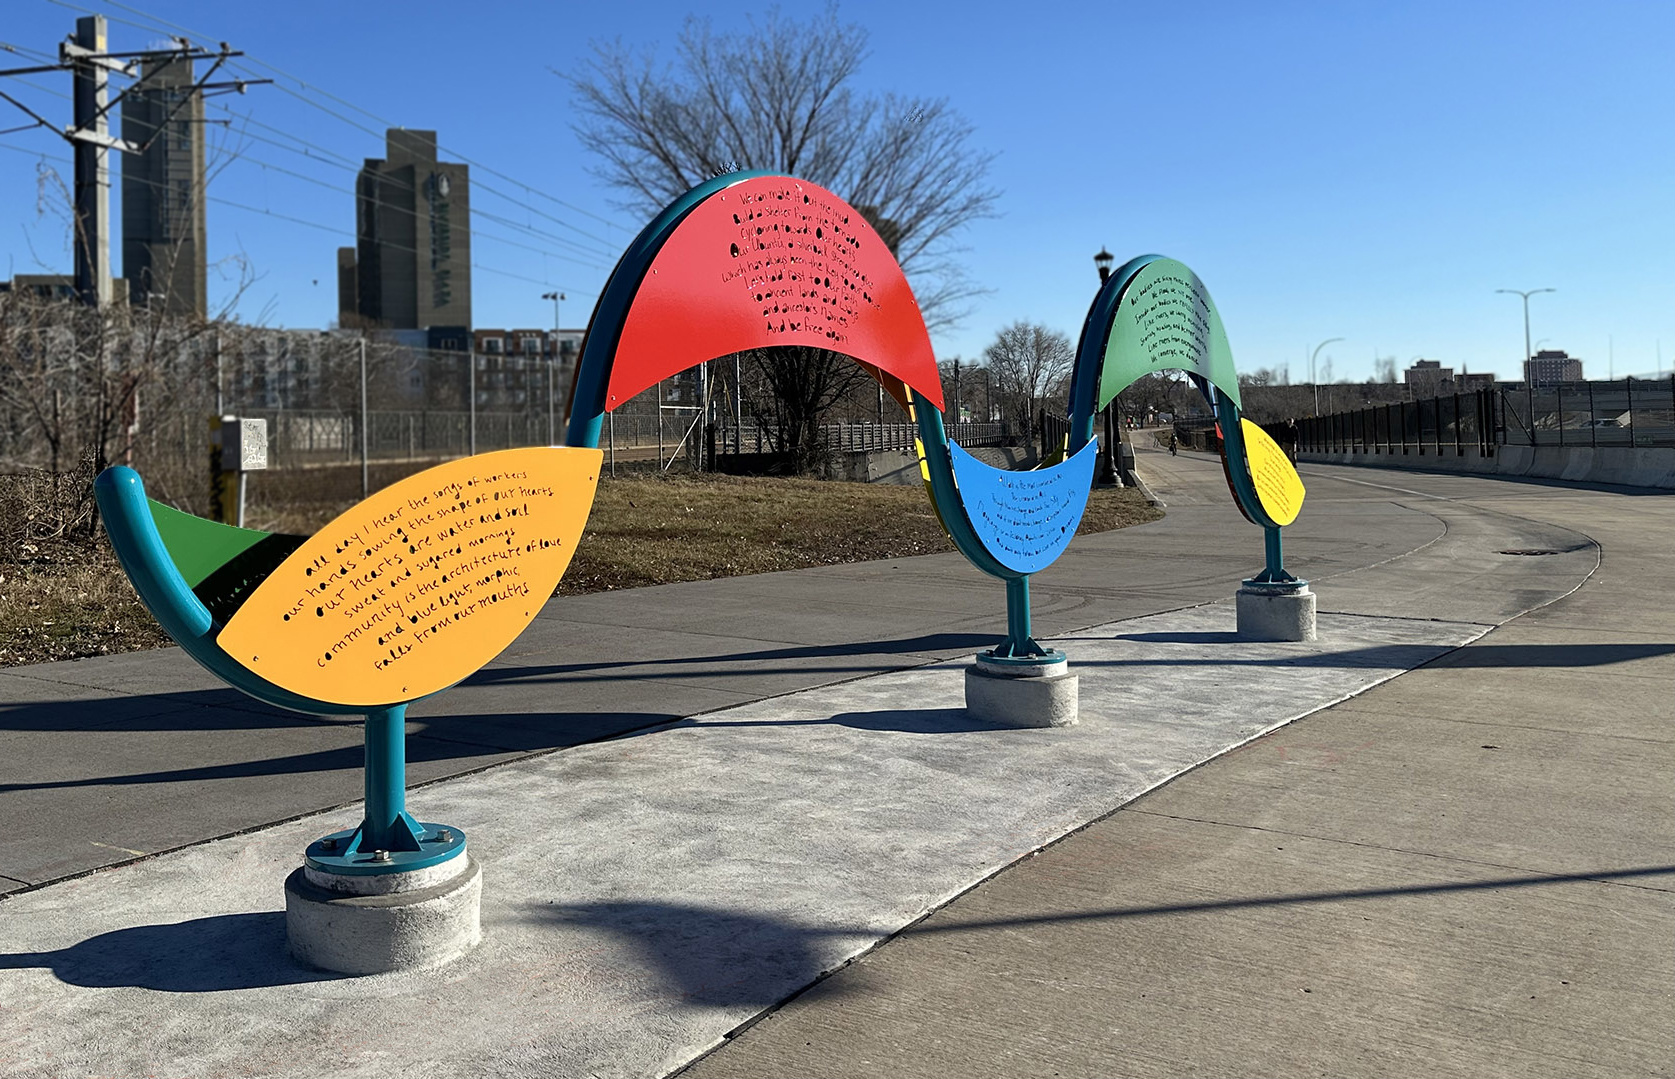 A sculpture with poetry embedded in its panels